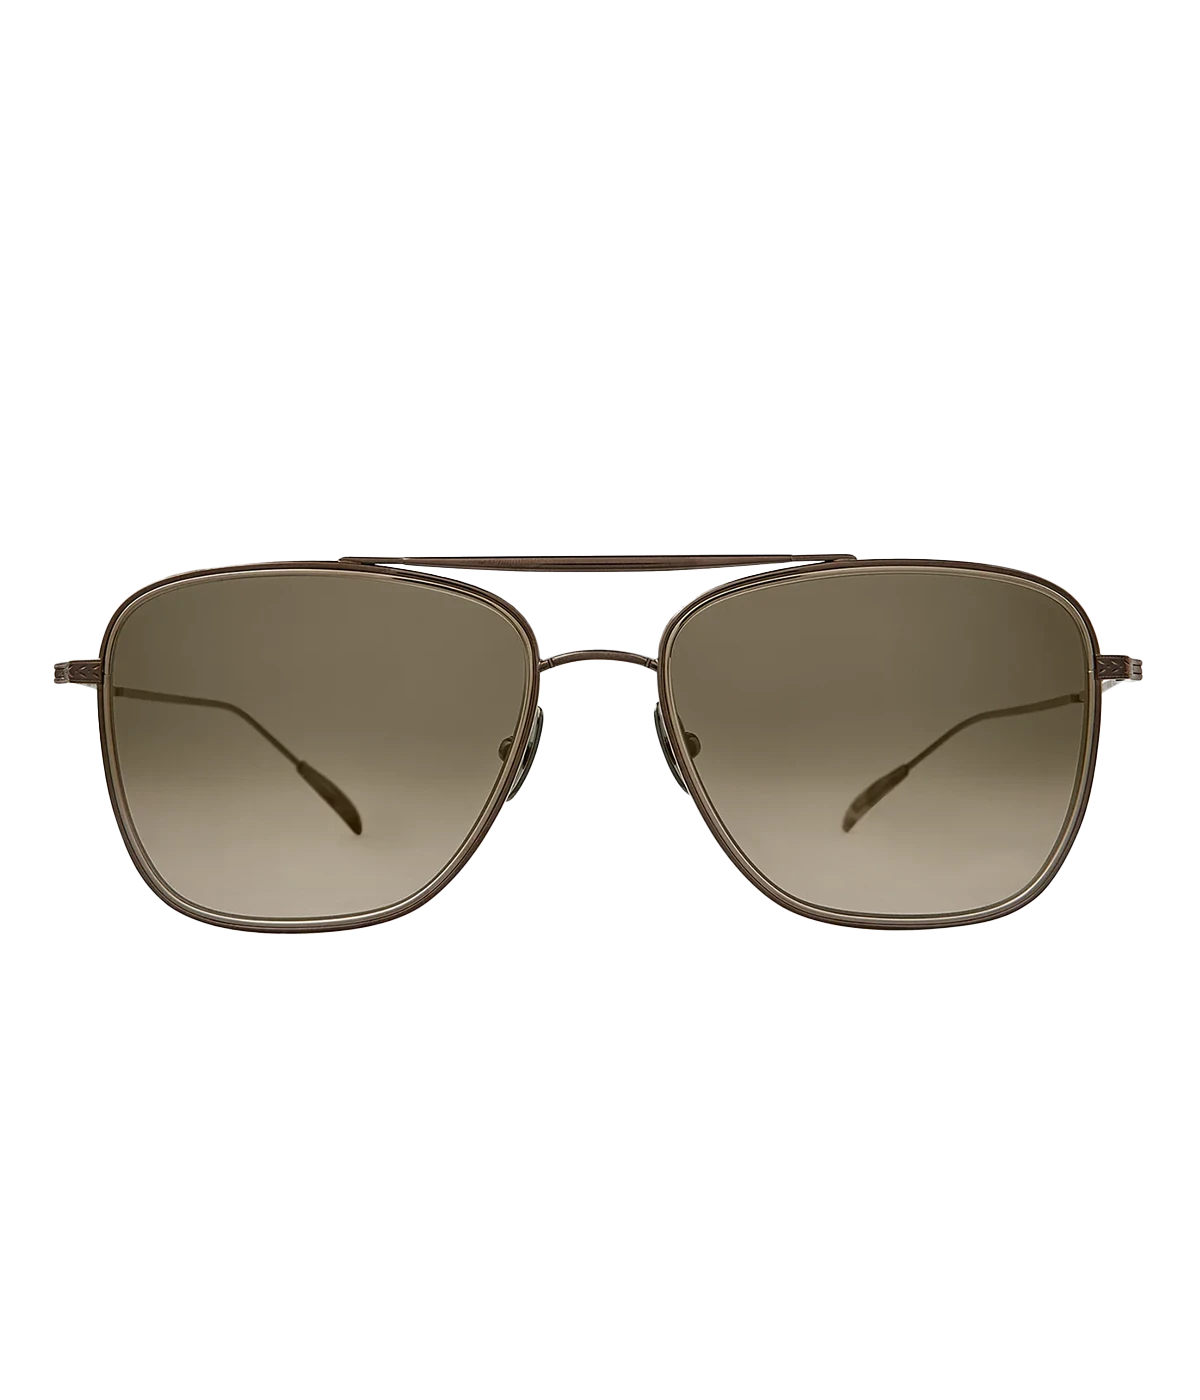 Titanium rimmed grey sunglasses by Mr Leight. Handcrafted in Japan.